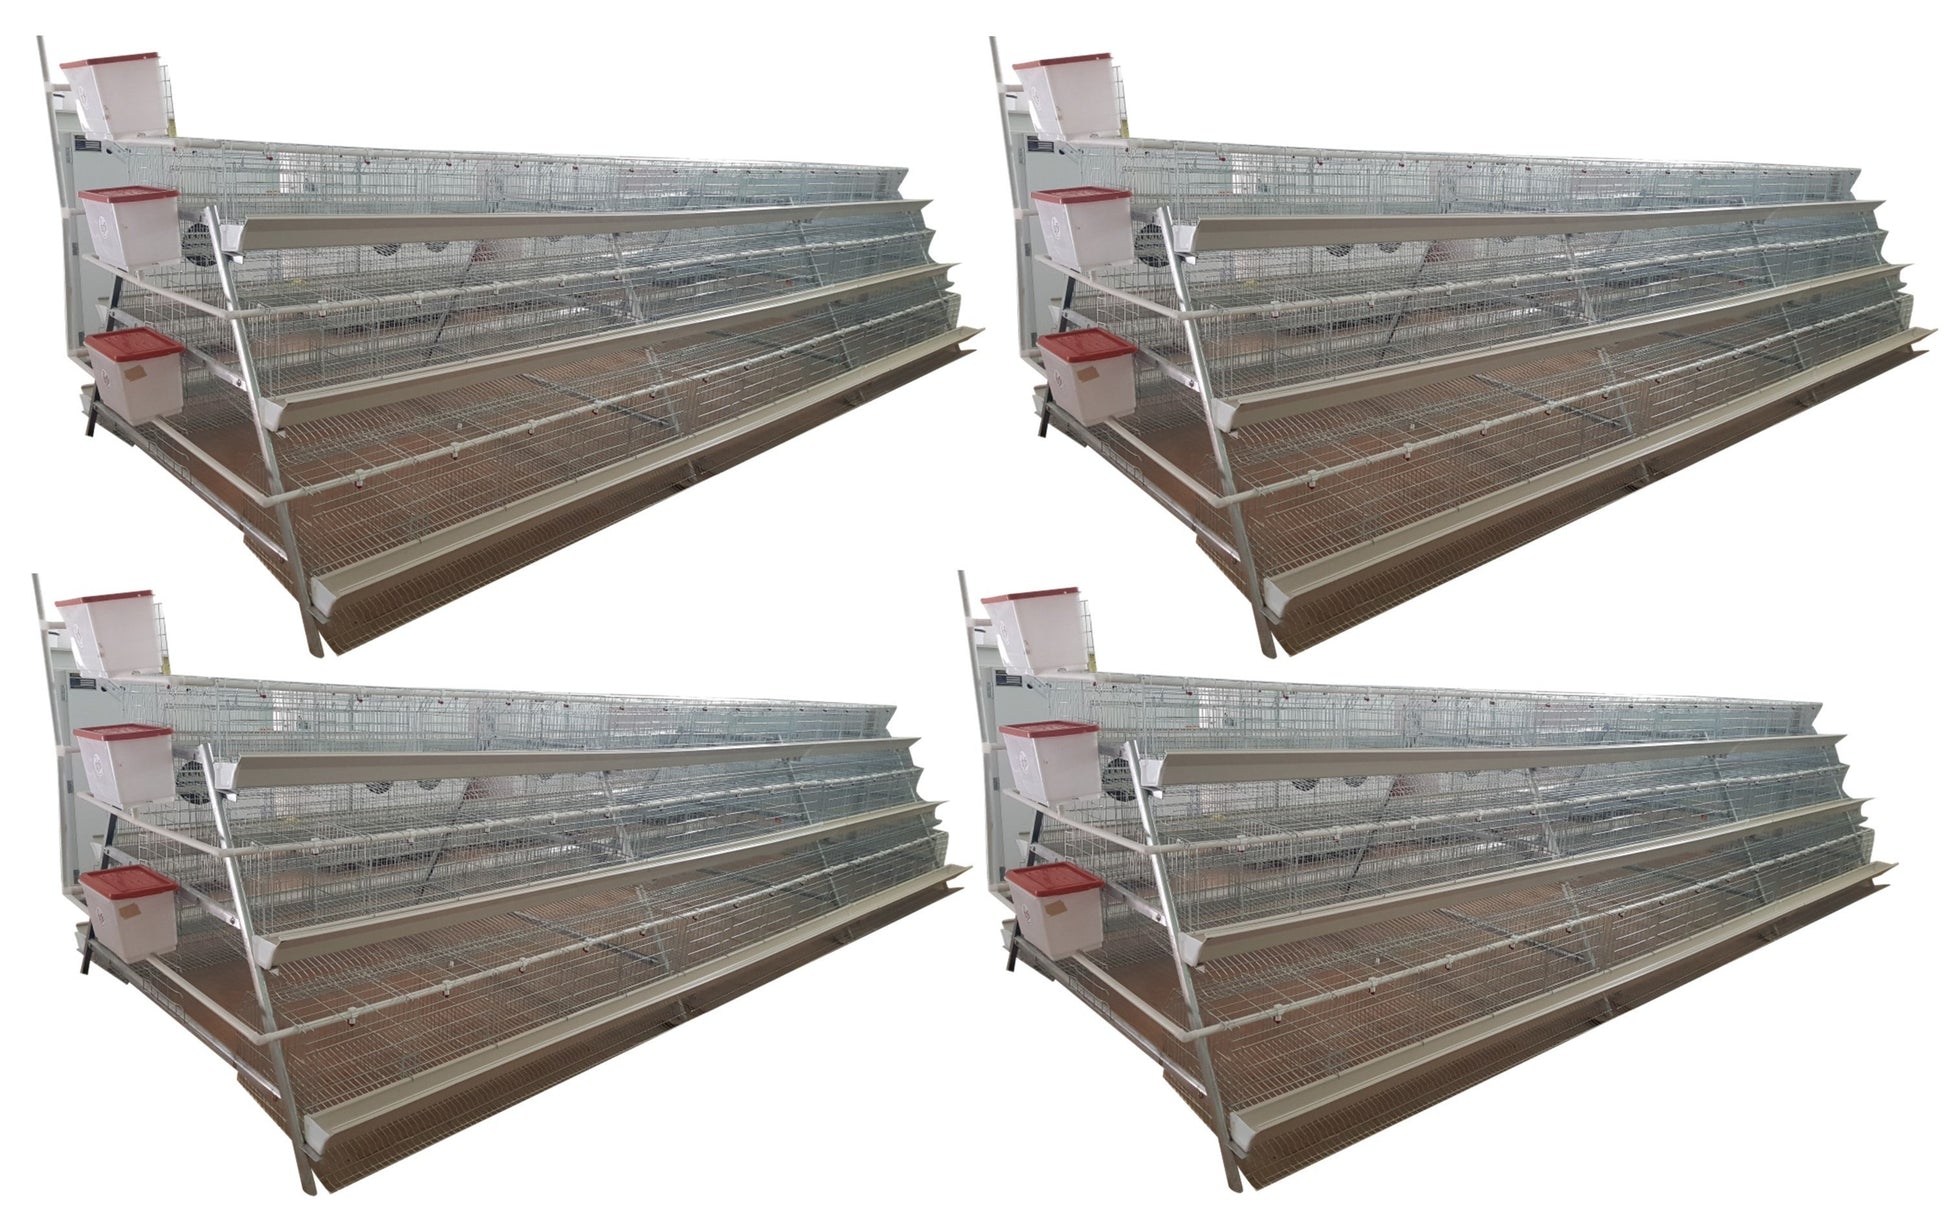 1440 Bird Egg Laying Cage - Elite Poultry Equipment South Africa